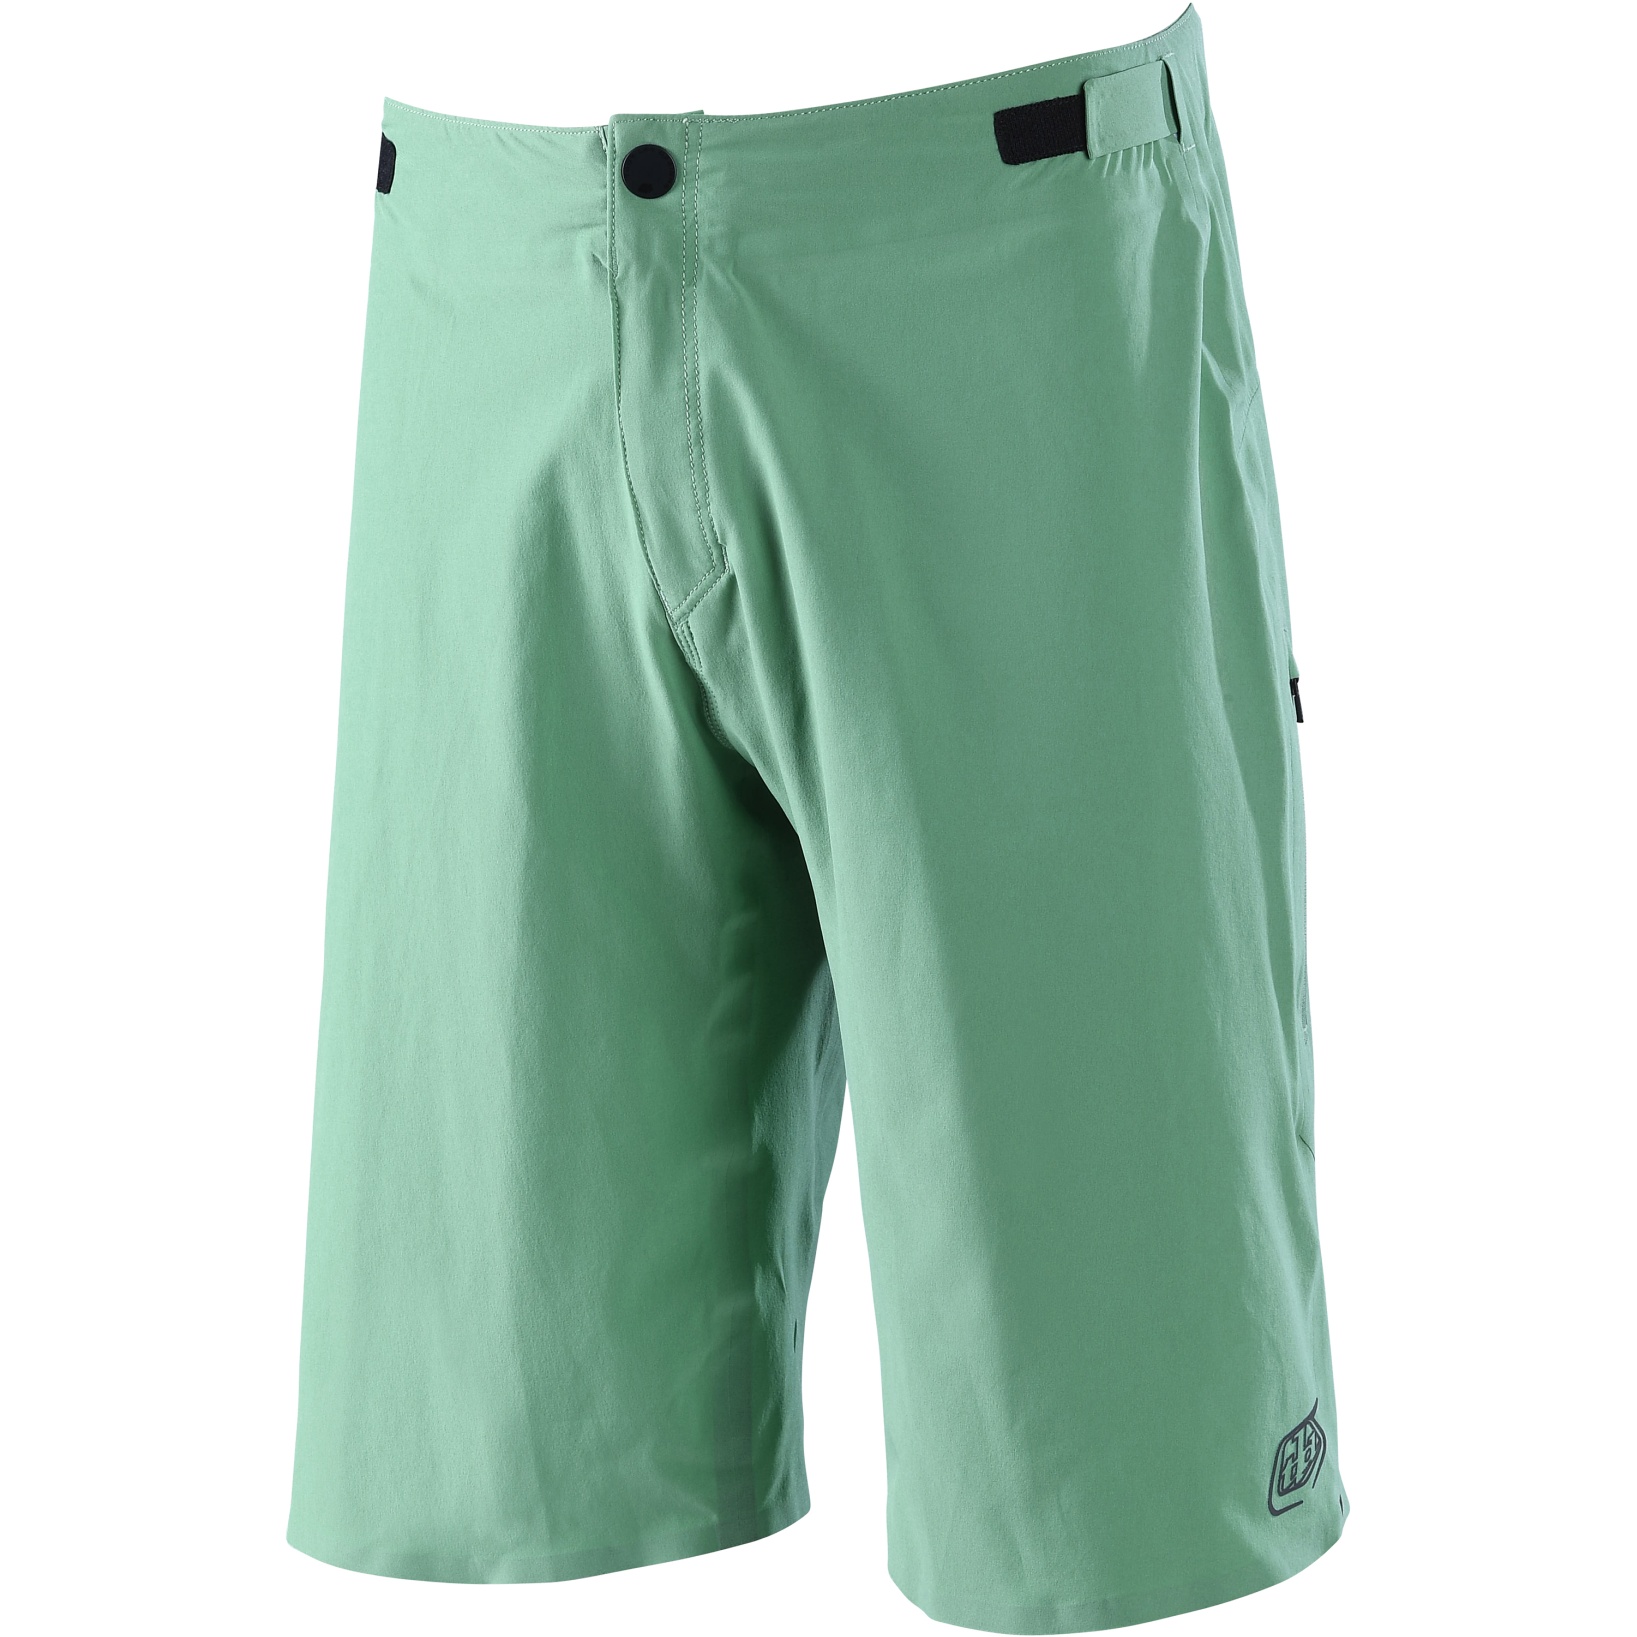 Productfoto van Troy Lee Designs Drift Short Shell - Solid Glass Green